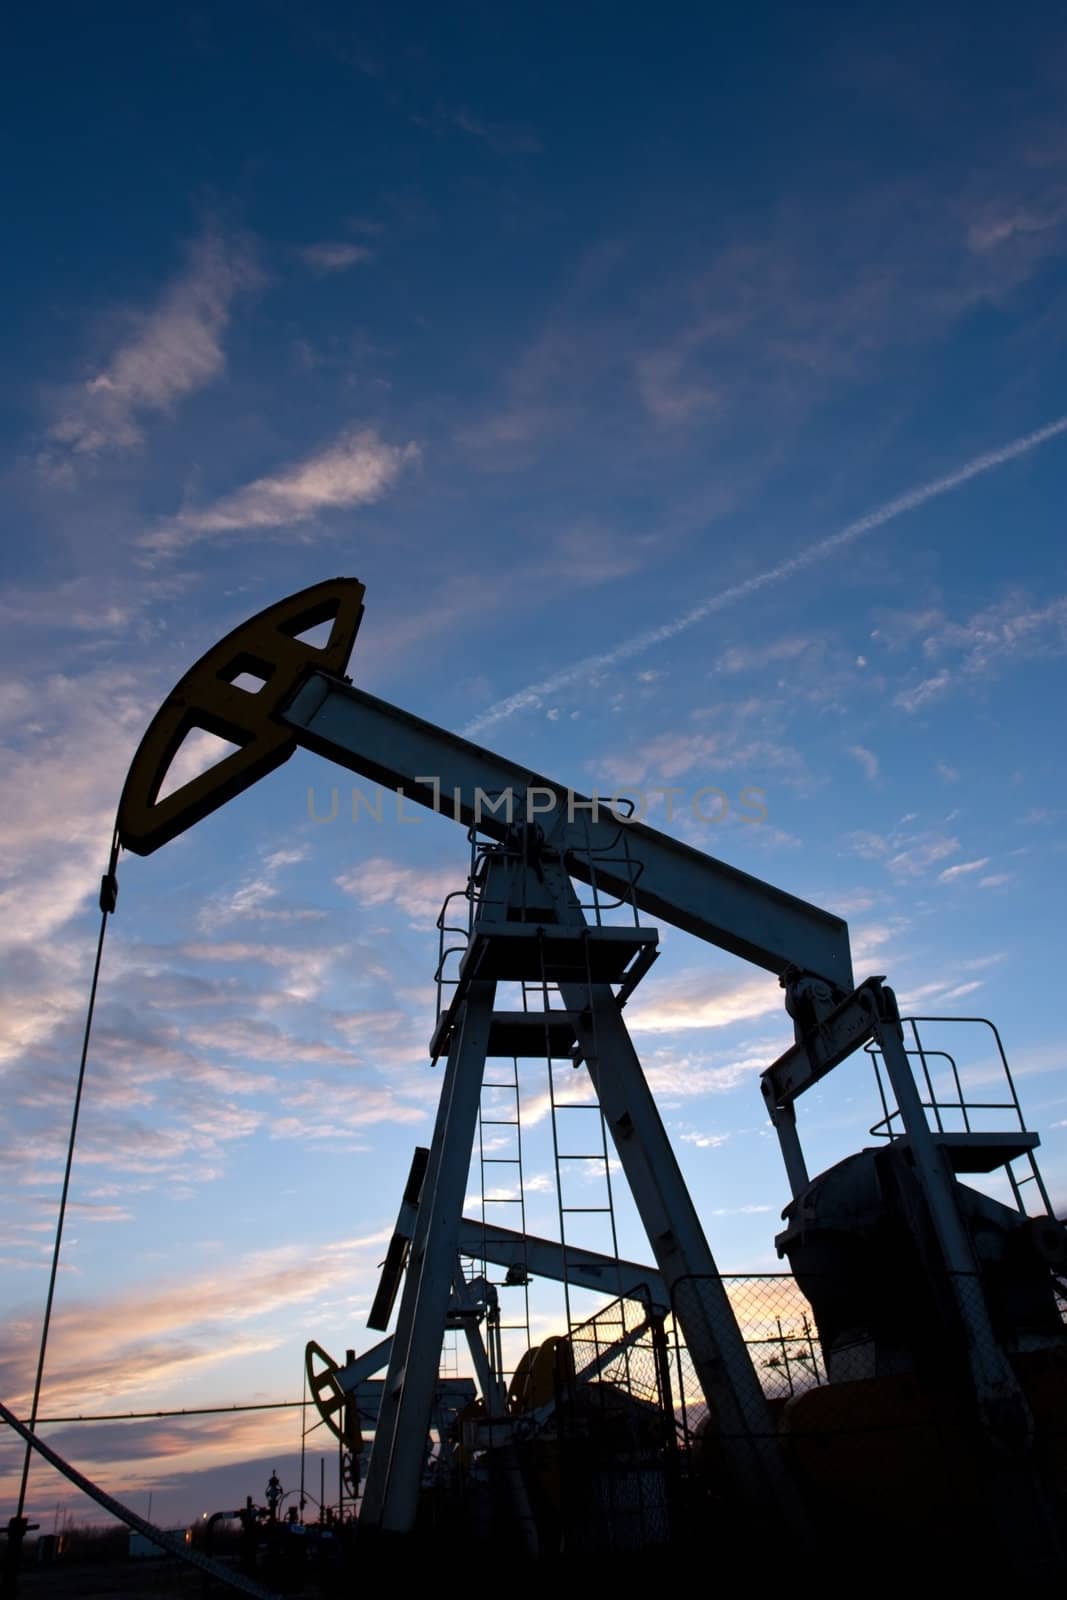 The oil pump on a background of the sunset sky 